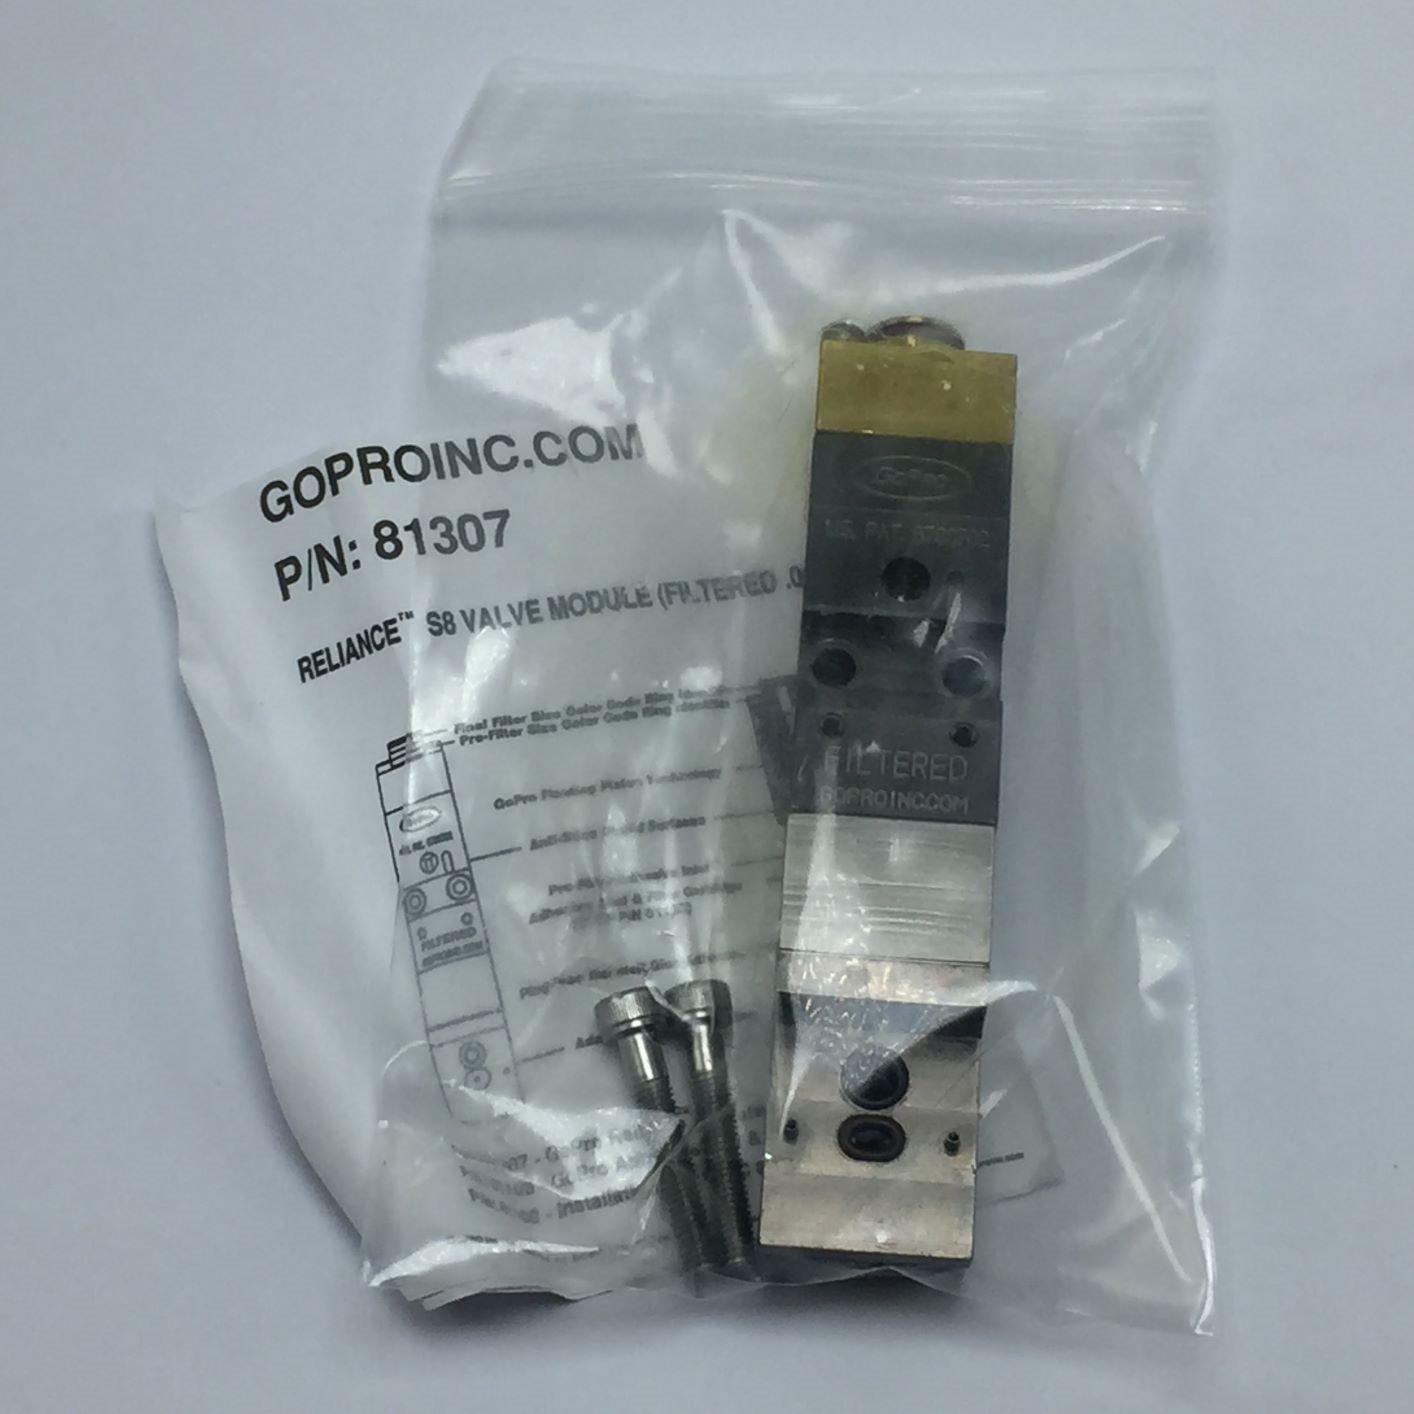 NEW GOPROINC 81307 RELIANCE S8 VALVE MODULE FILTERED 0.008 REPL NORDSON 1054951 